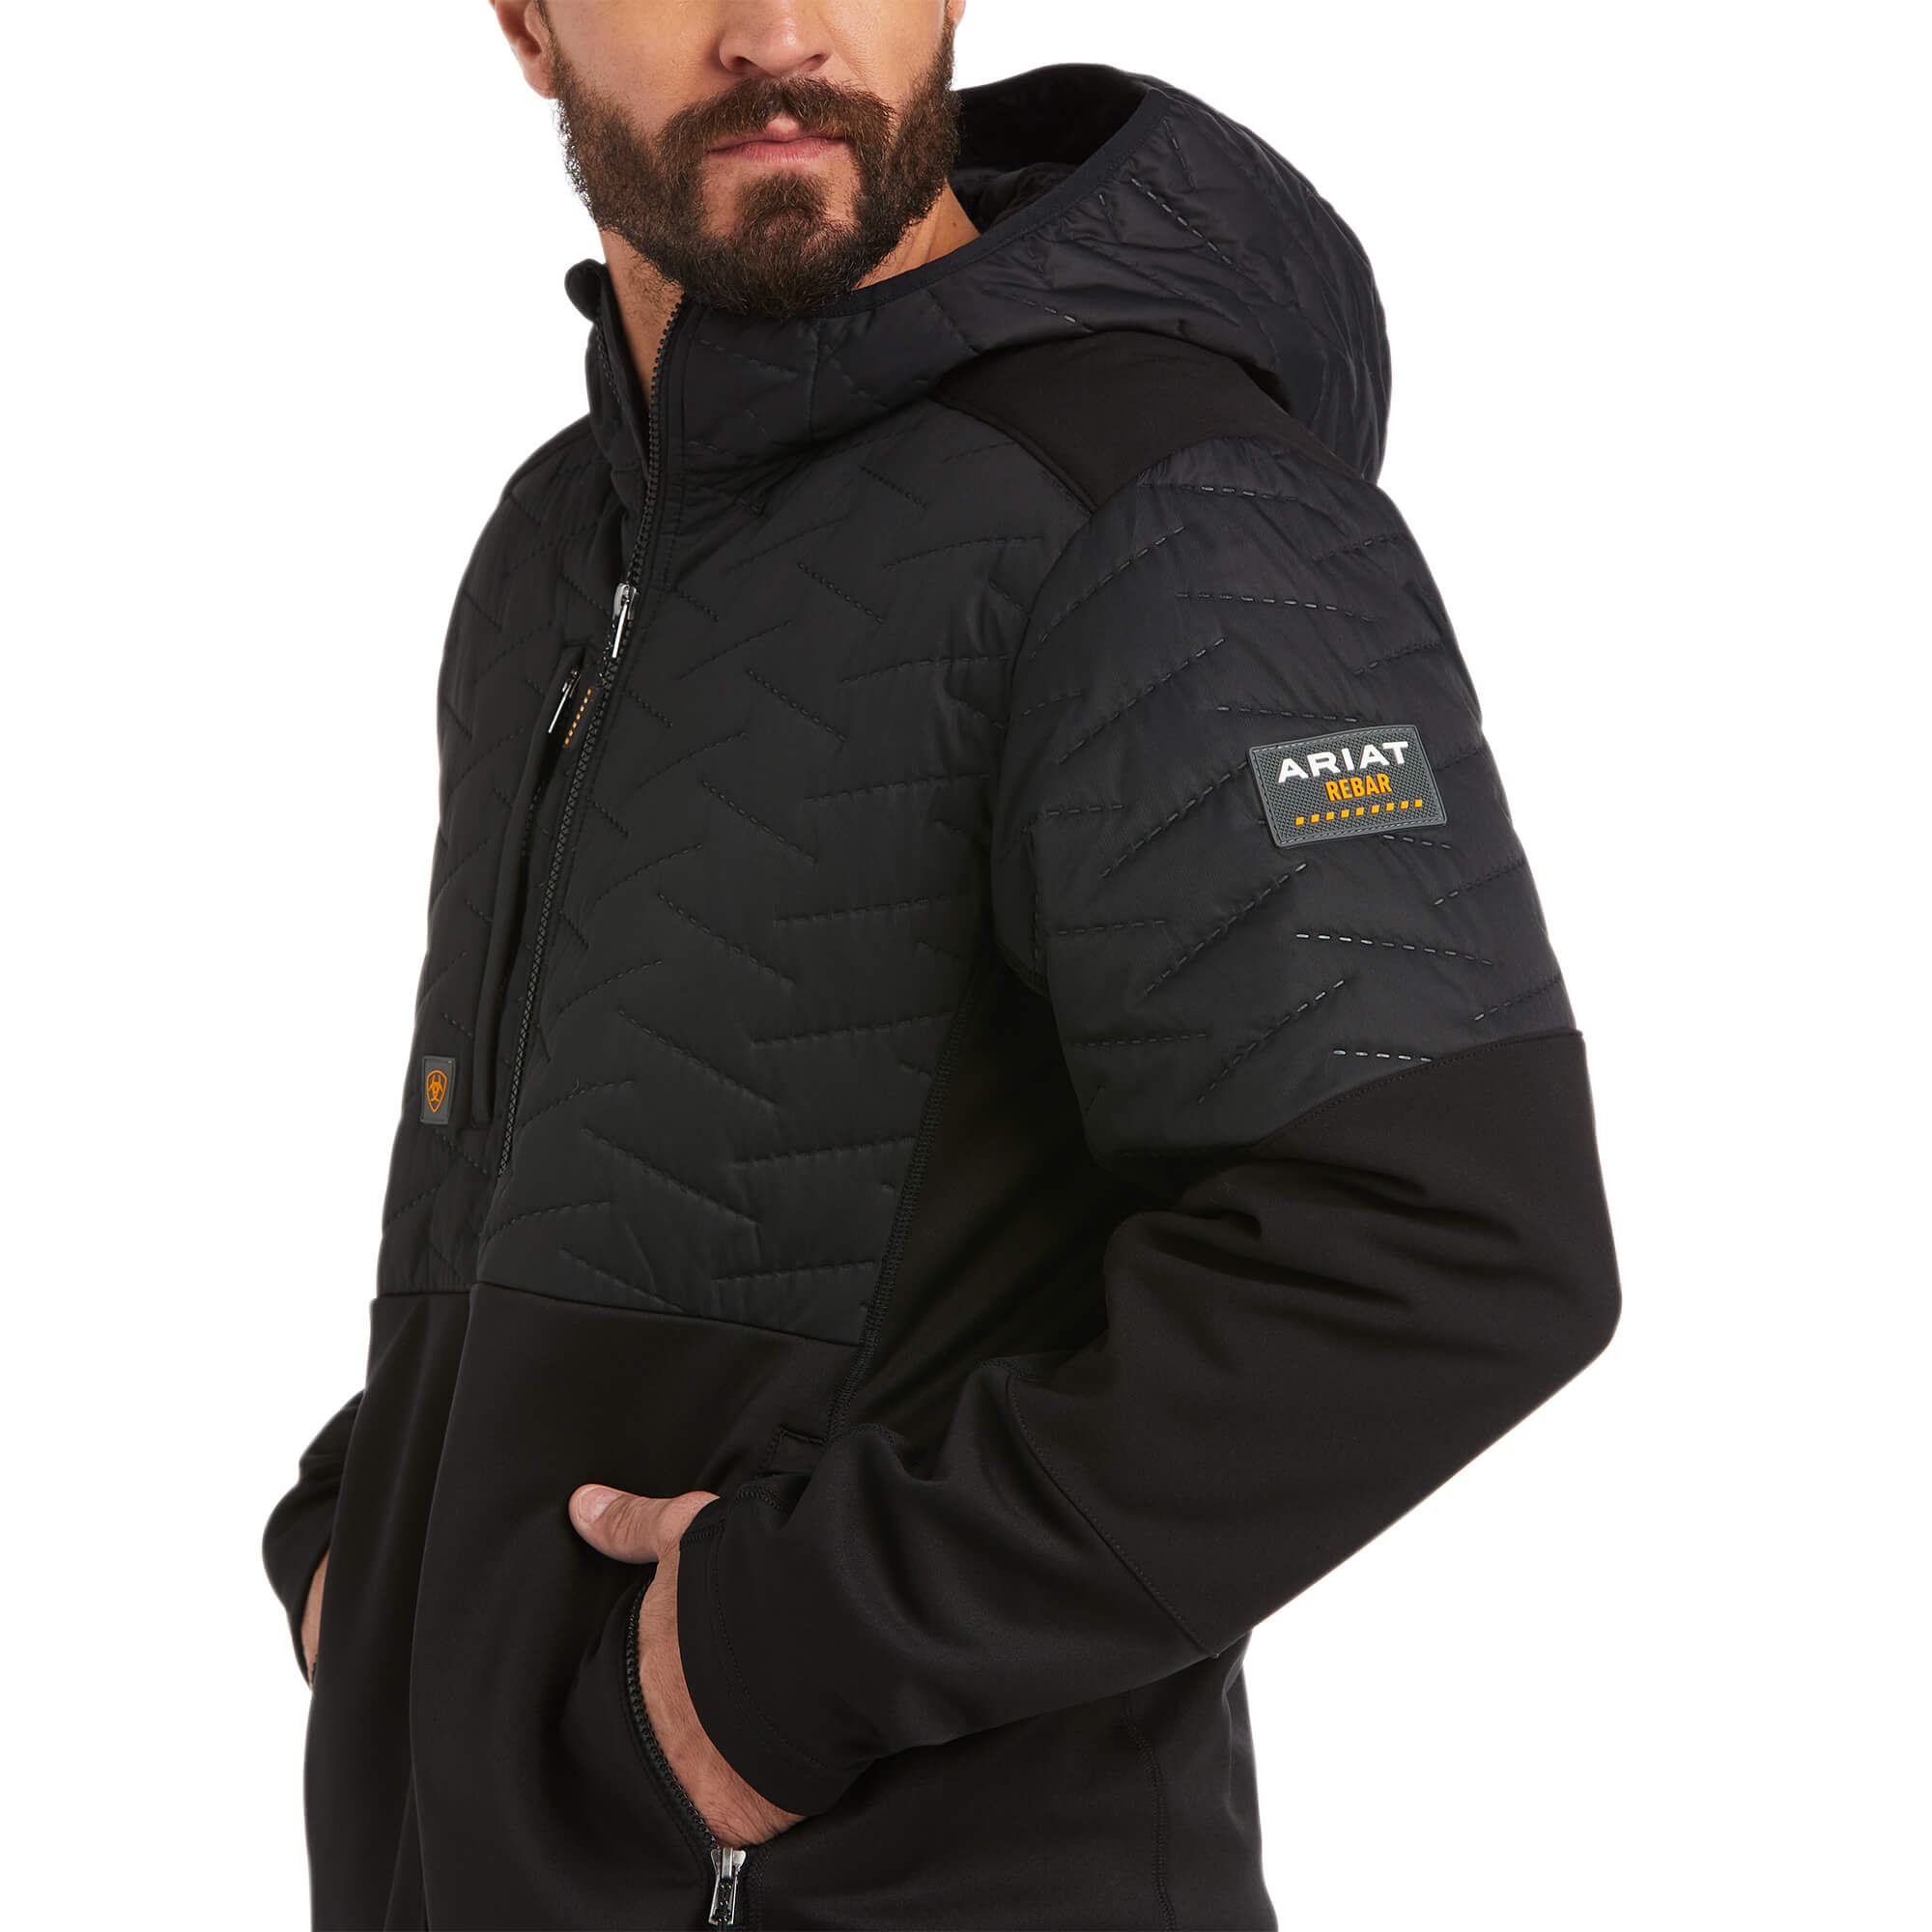 Men's Rebar Cloud 9 Insulated Jacket in Black, Size: Large_Tall by Ariat